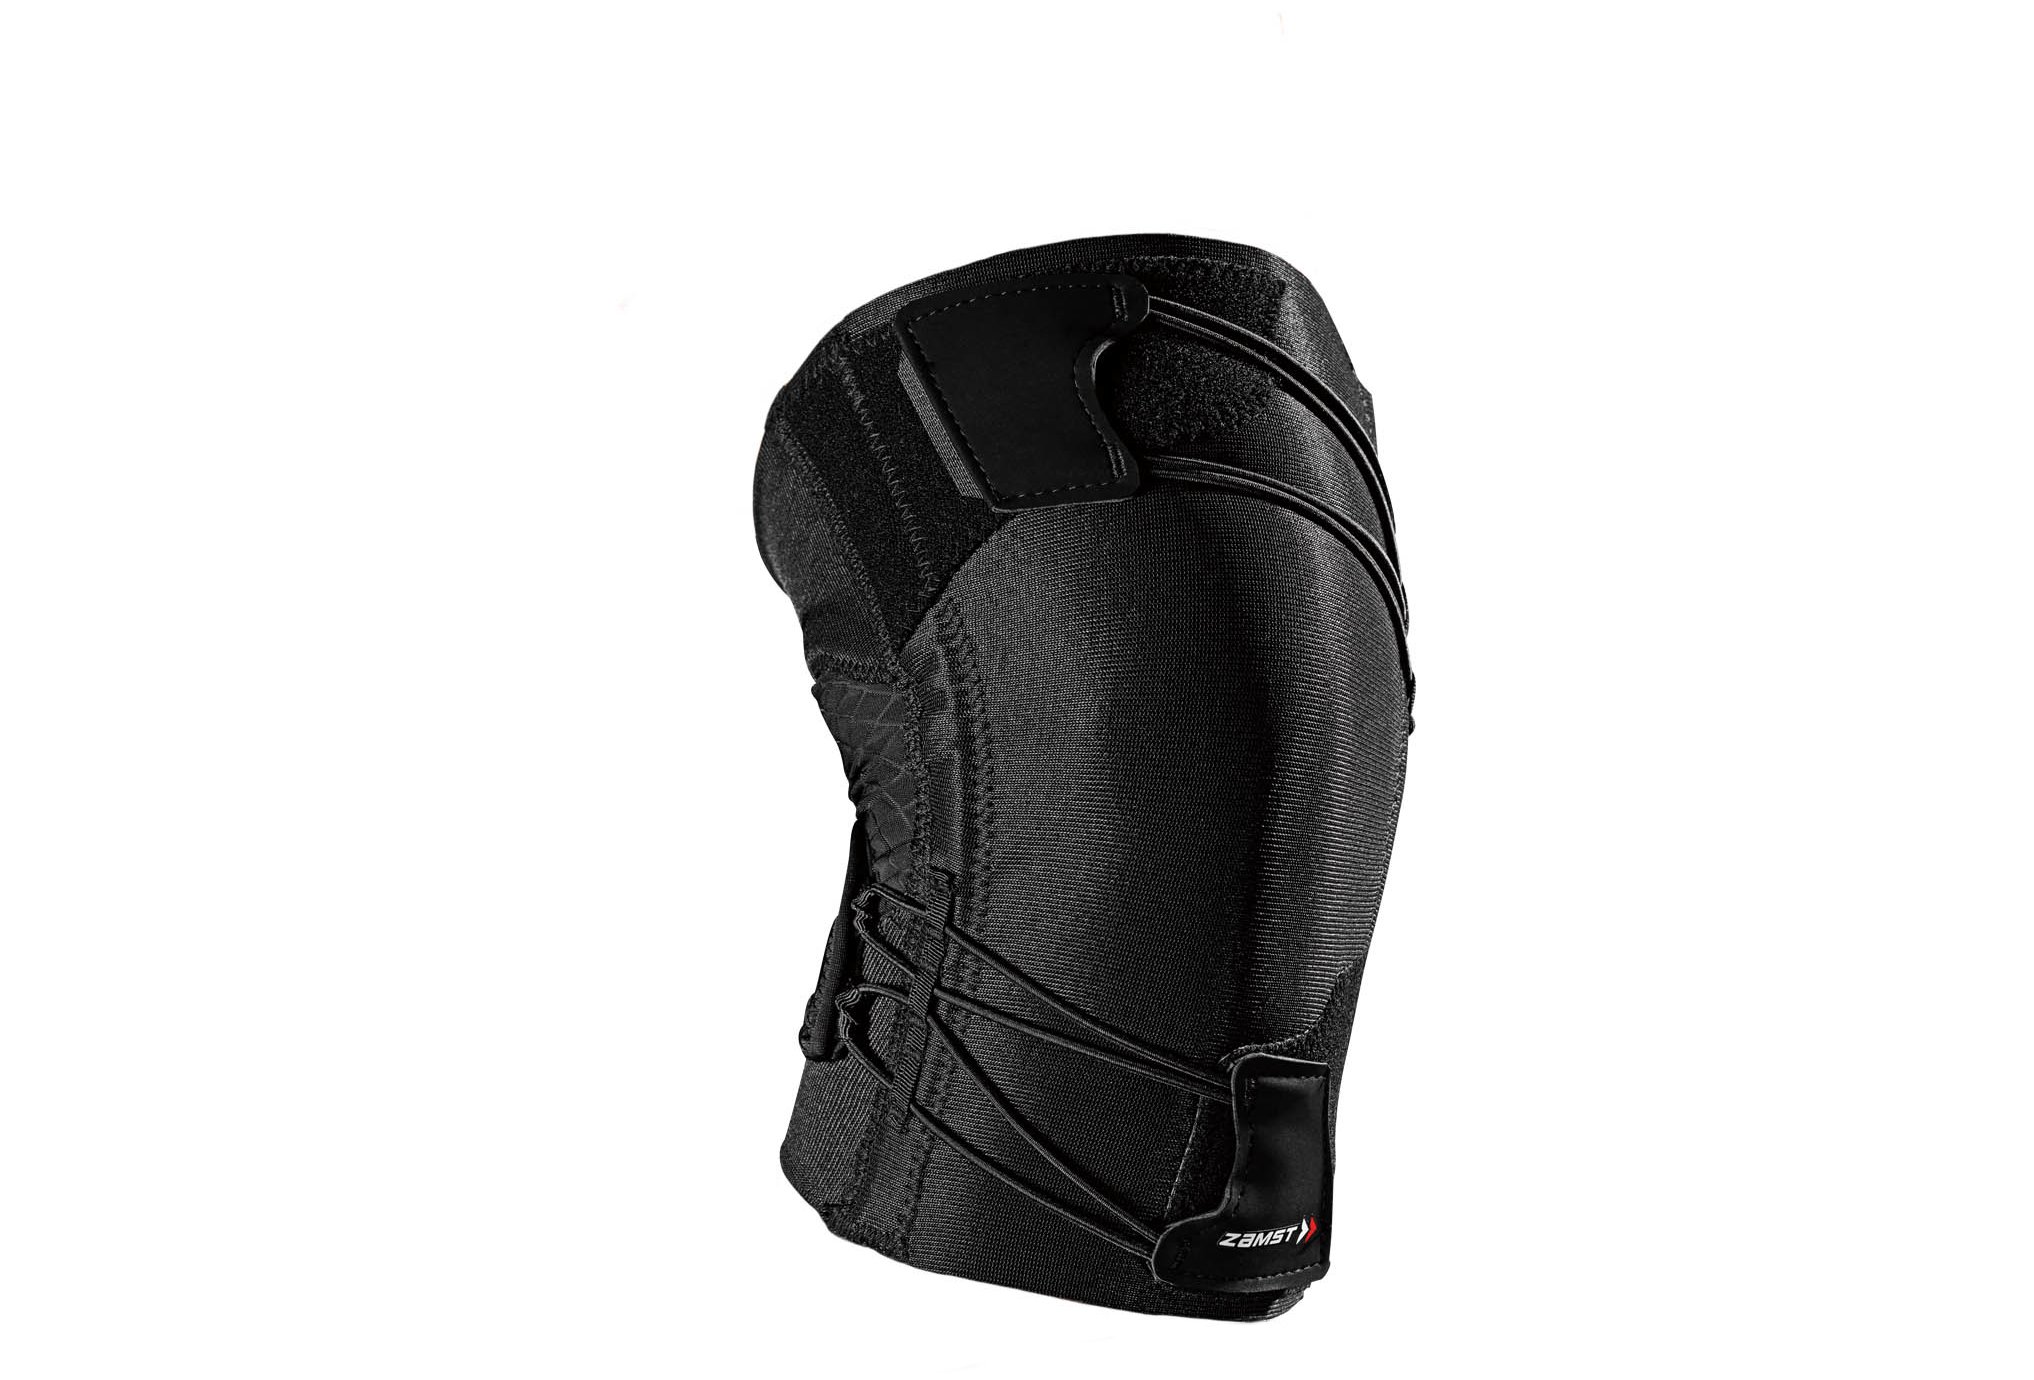 Zamst RK-1 Plus - Genou Gauche Protection musculaire & articulaire